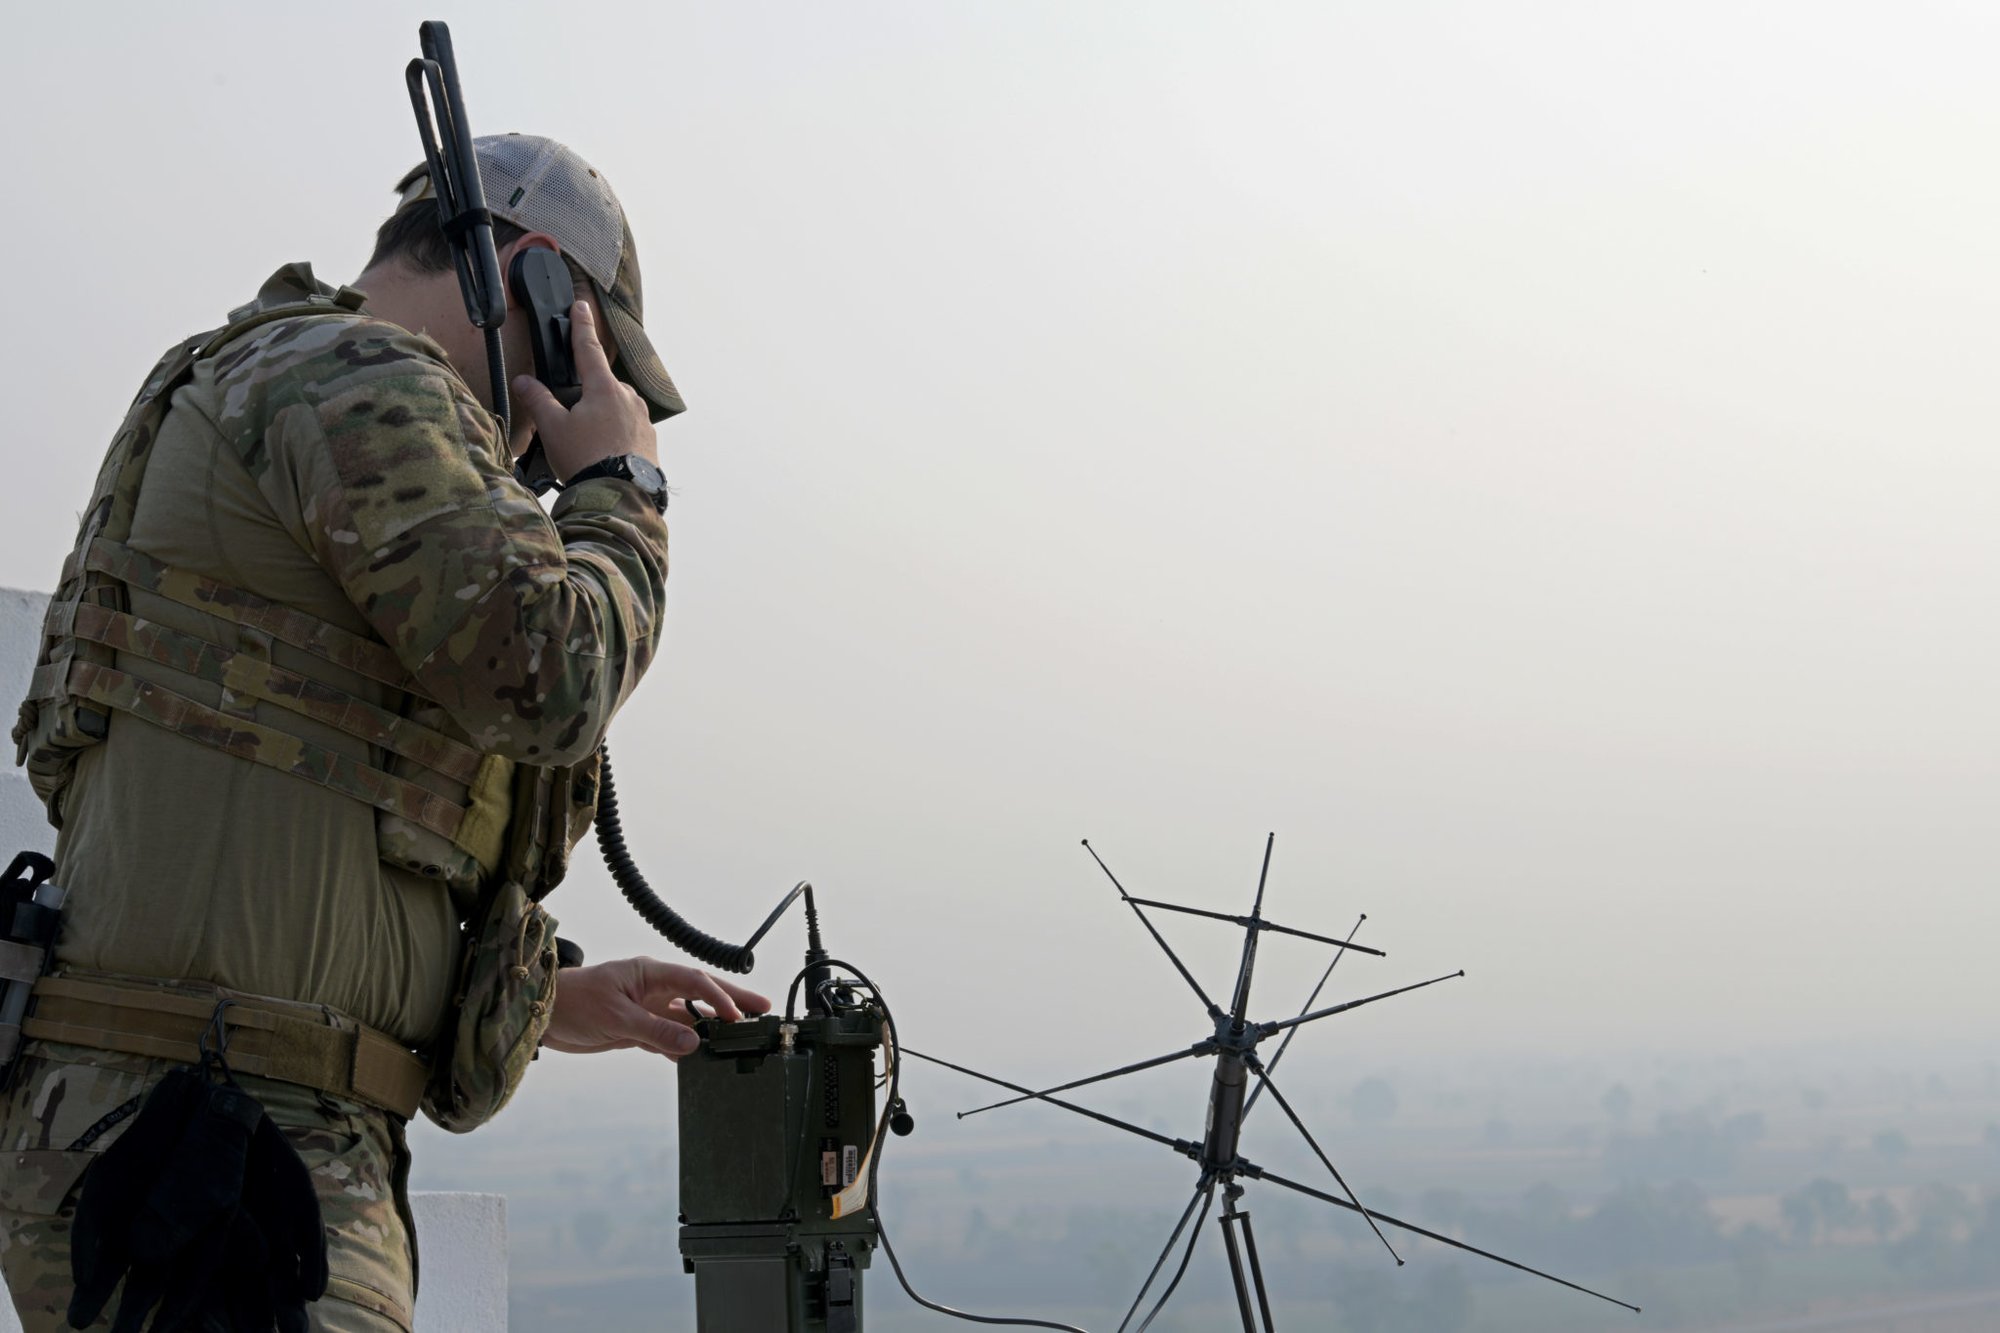 A U.S. Air Force combat controller with the 320th Special Tactics Squadron conducts radio checks in support of Exercise Cobra Gold 2020 at Chandy Range in Lopburi province, Kingdom of Thailand, Feb. 27, 2020. Exercise Cobra Gold demonstrates the commitment of the Kingdom of Thailand and the United States to our long-standing alliance, promotes regional partnerships and advances security cooperation in the Indo-Pacific region. Photo by Sgt. Austin Fox, courtesy of the U.S. Army.